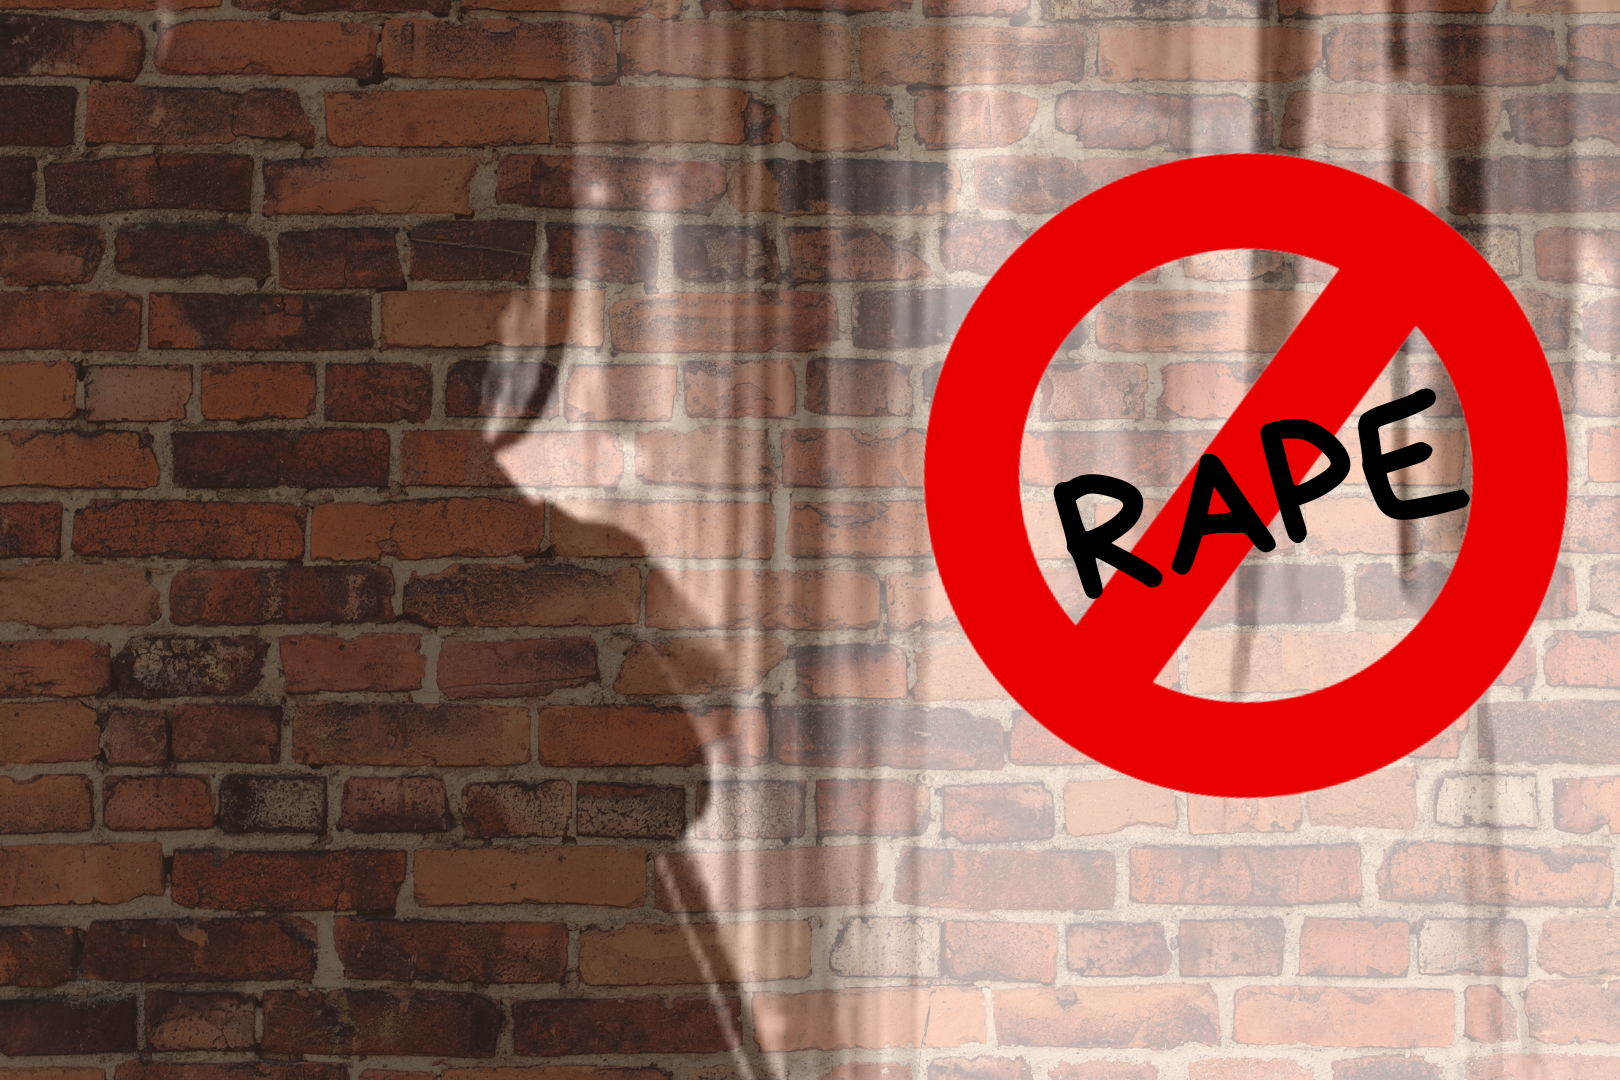 Minor allegedly raped by Madrasa manager in UP